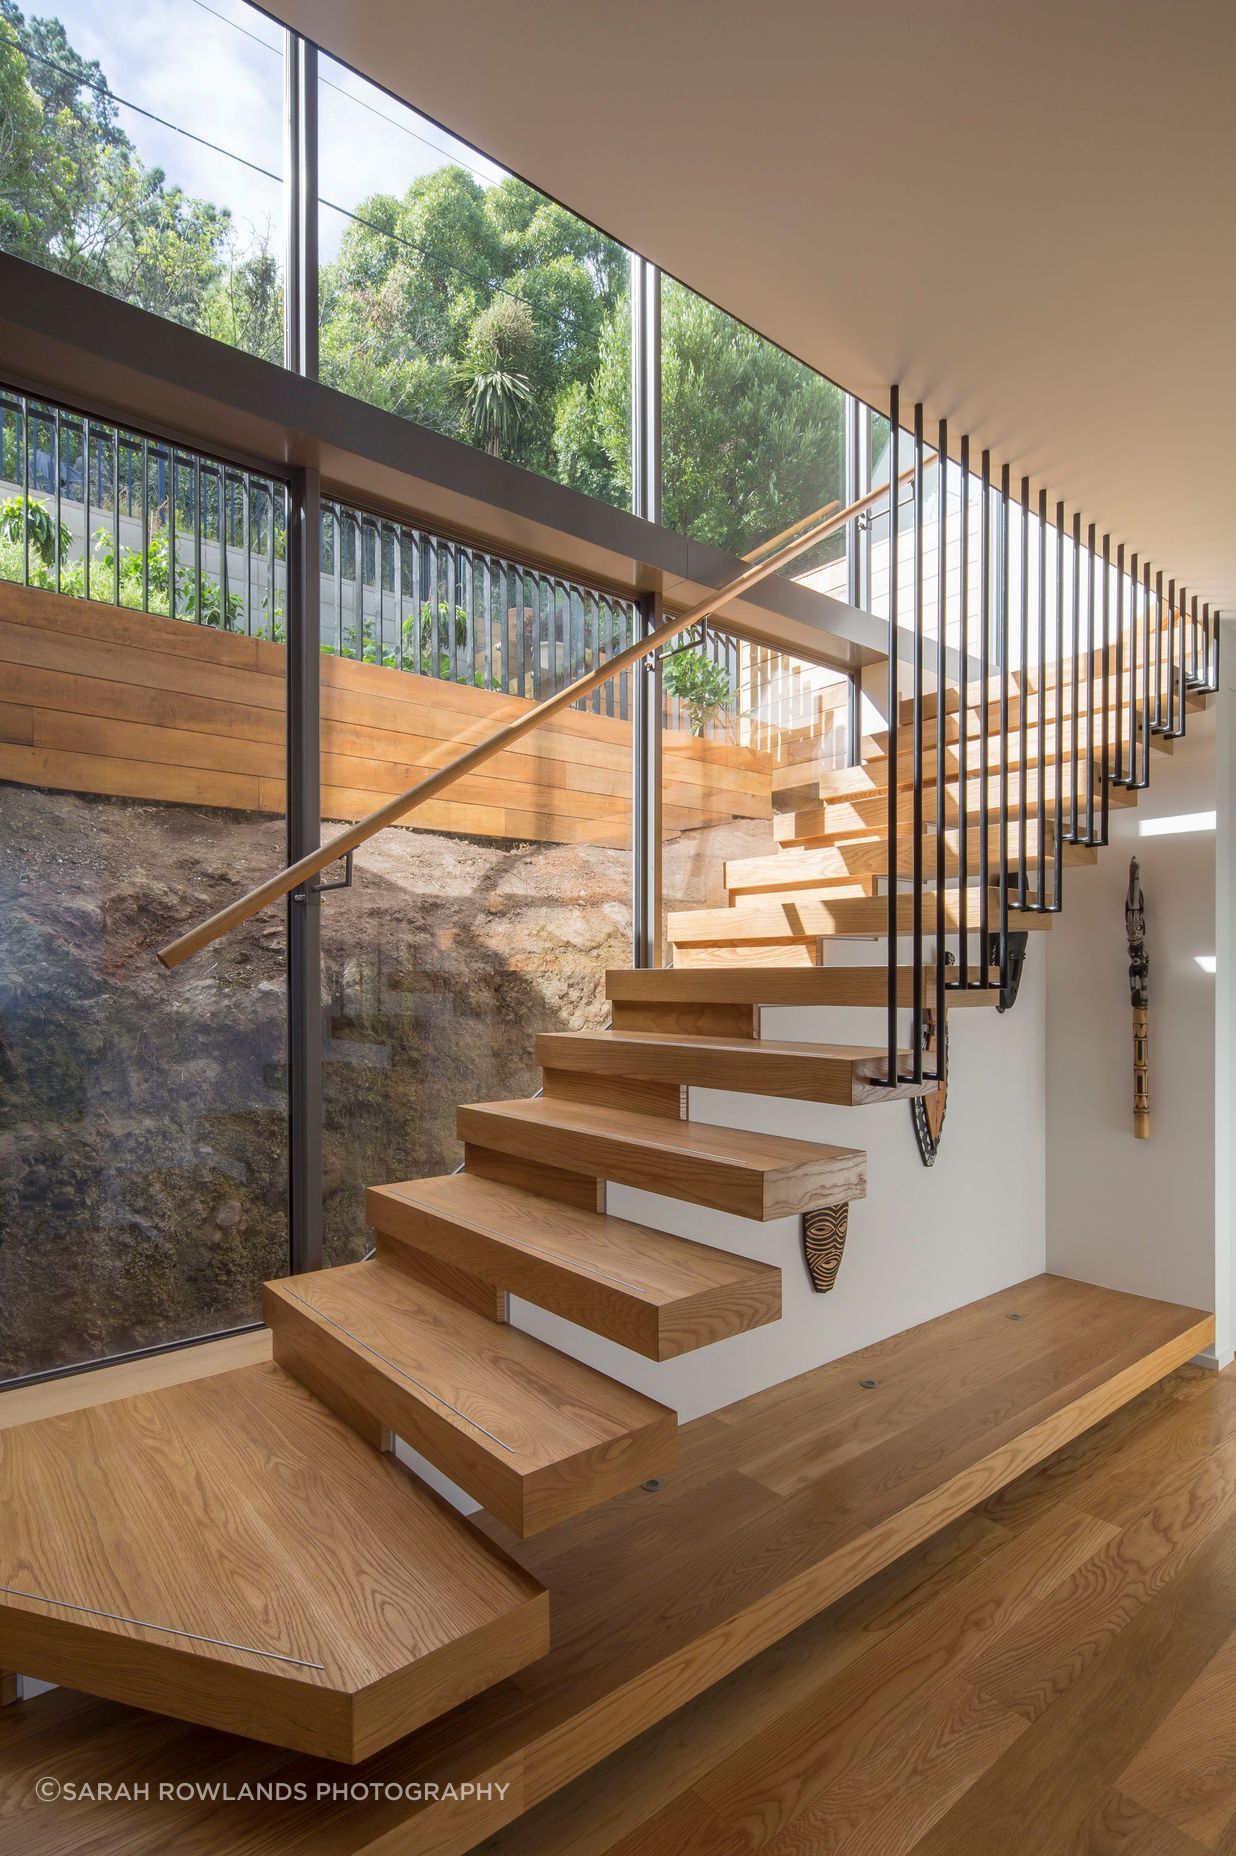 Double-height glazing behind the main, cantilevered, staircase shows how the house is sitting shy of the rockface behind.